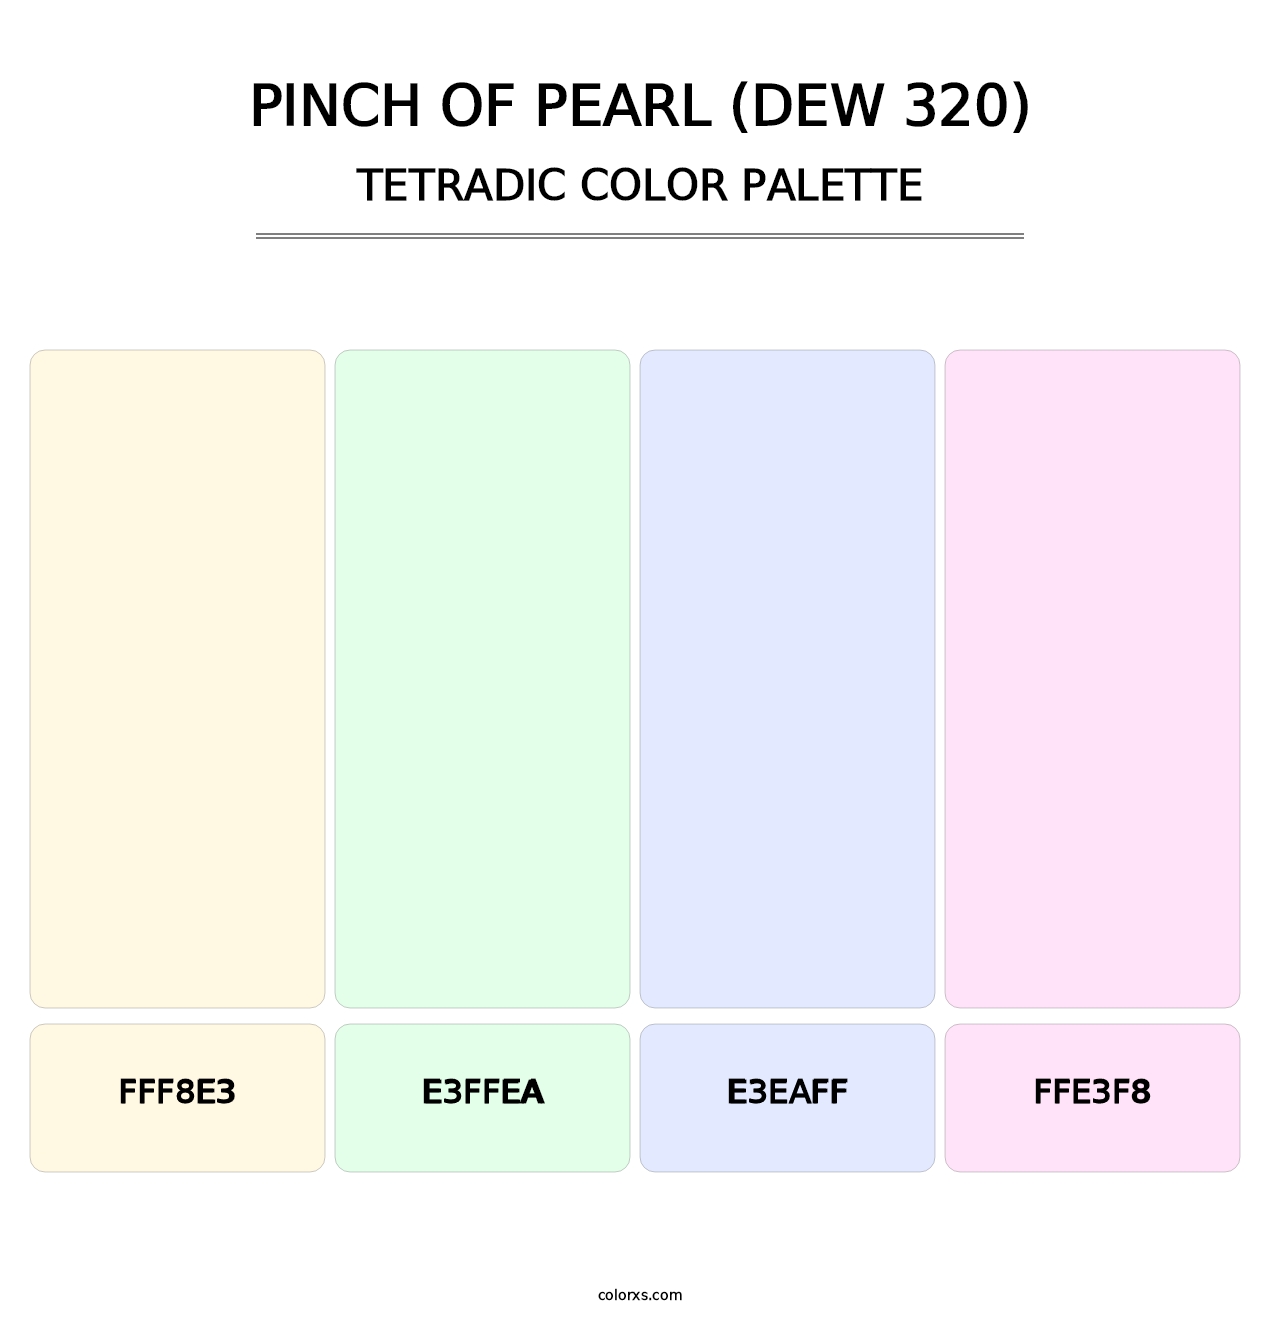 Pinch of Pearl (DEW 320) - Tetradic Color Palette